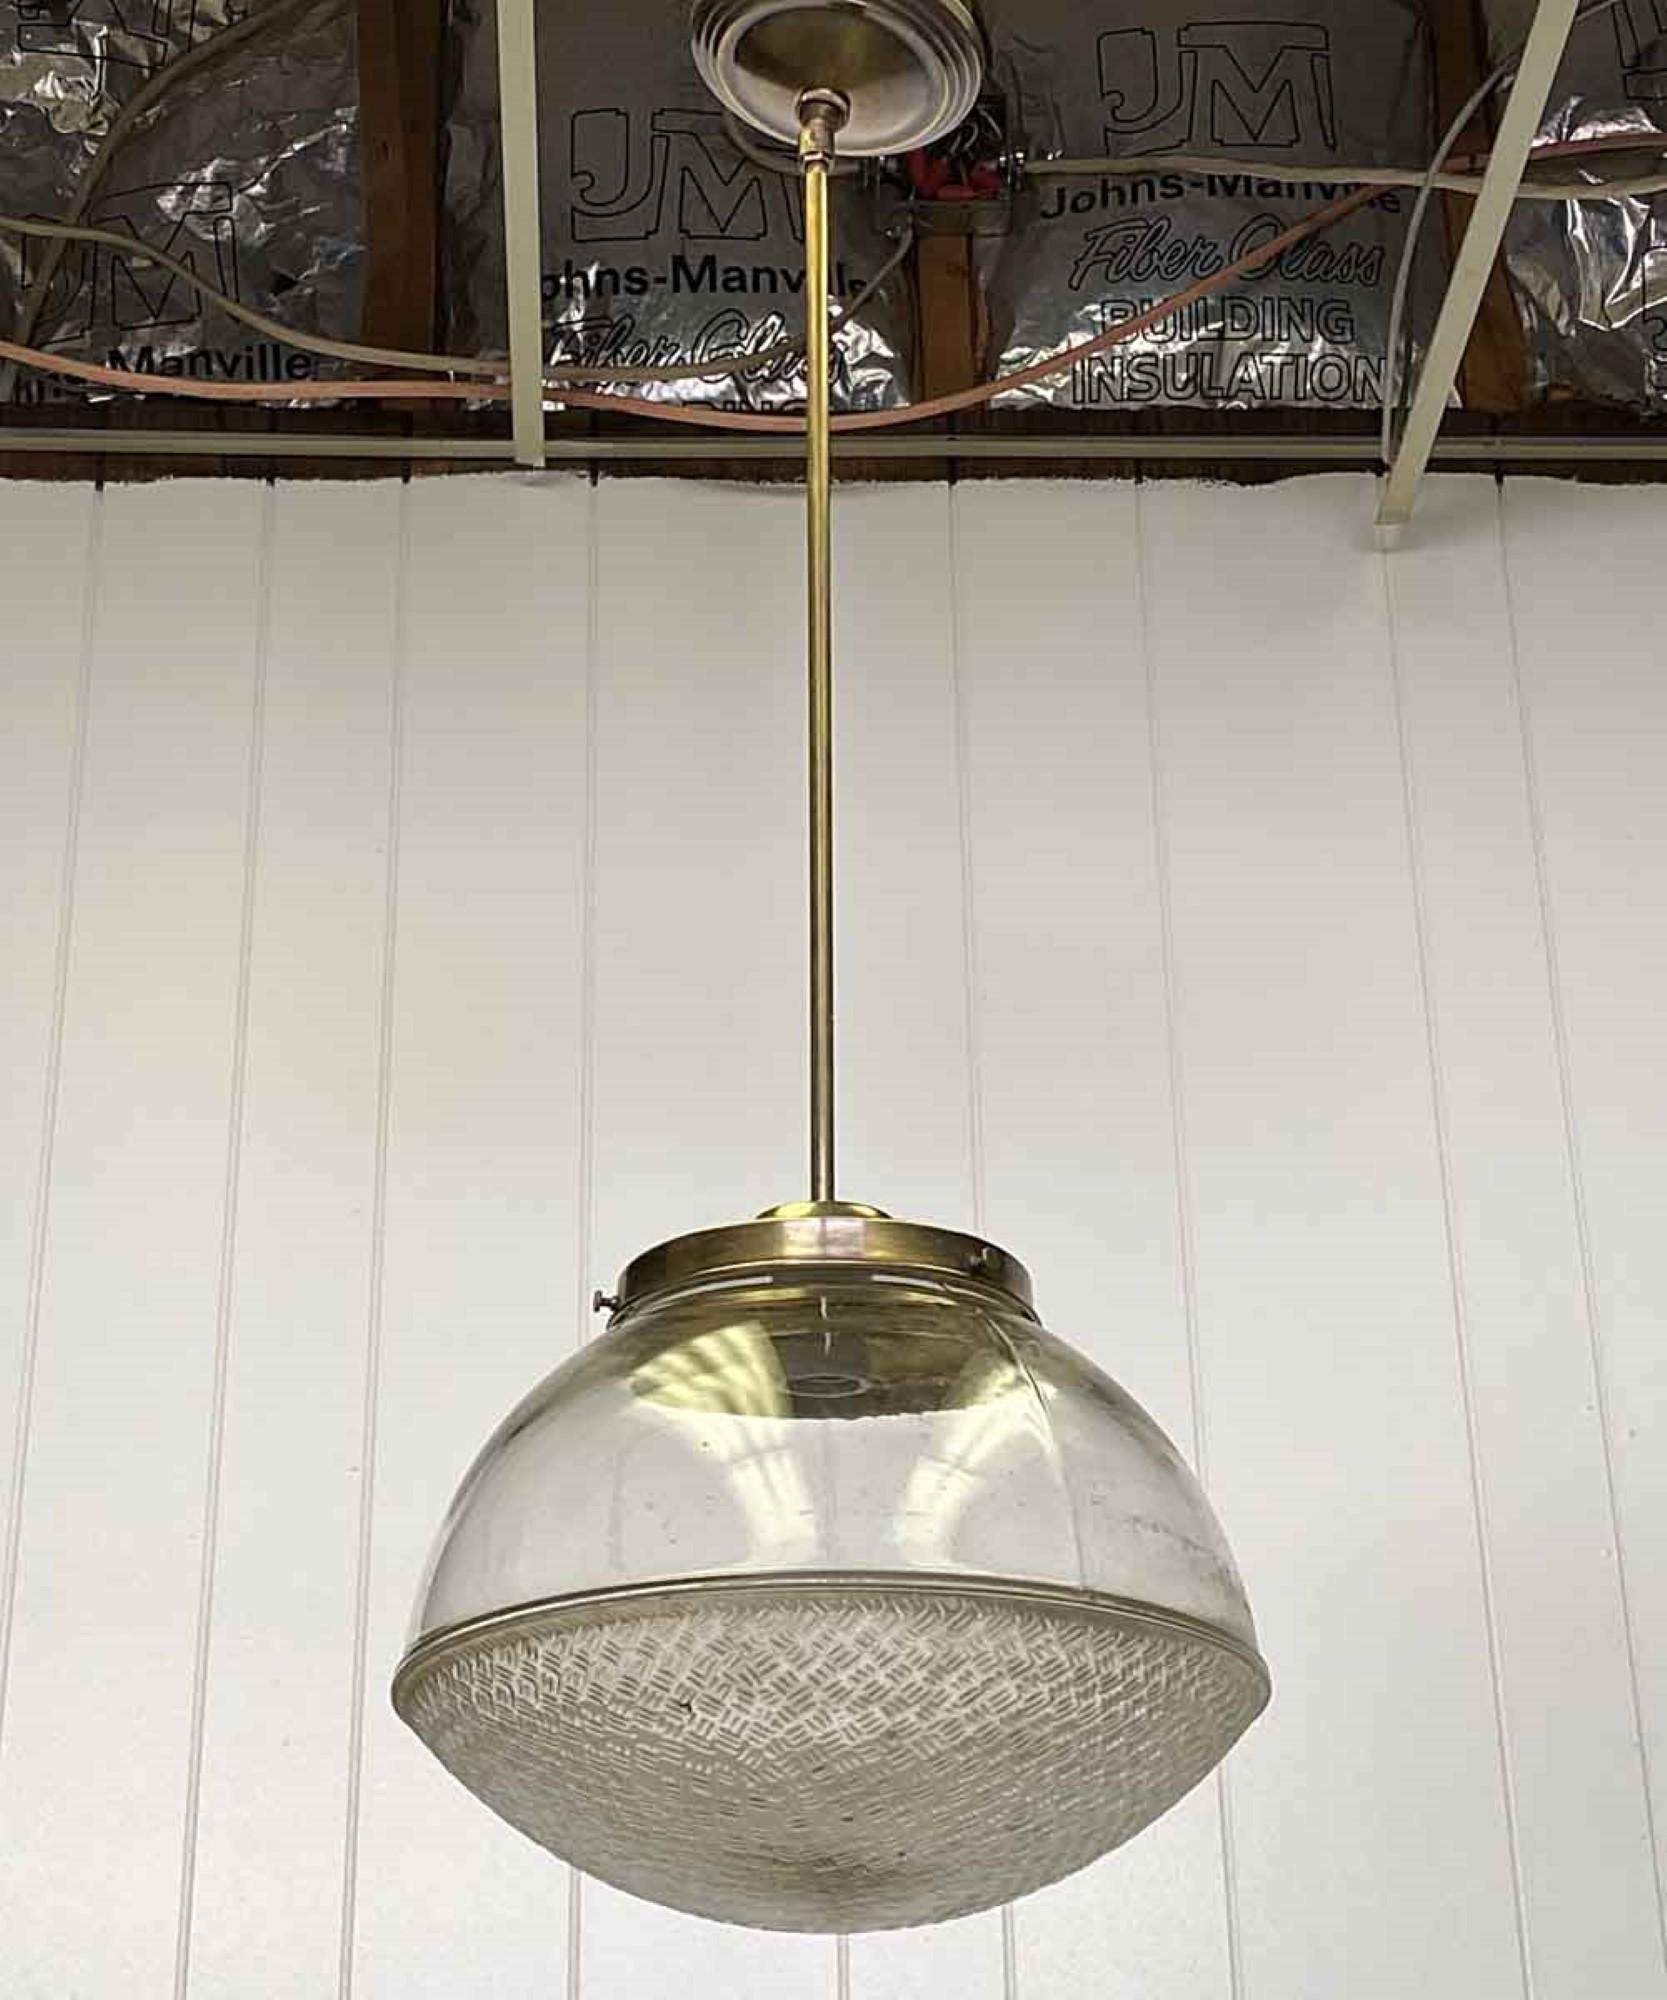 1920s glass globe fitted with a slender newly made brass pole fixture. The pole can be done in brushed nickel or steel at your request. This can be viewed at our Scranton, Pennsylvania location. Please inquire for the exact address.